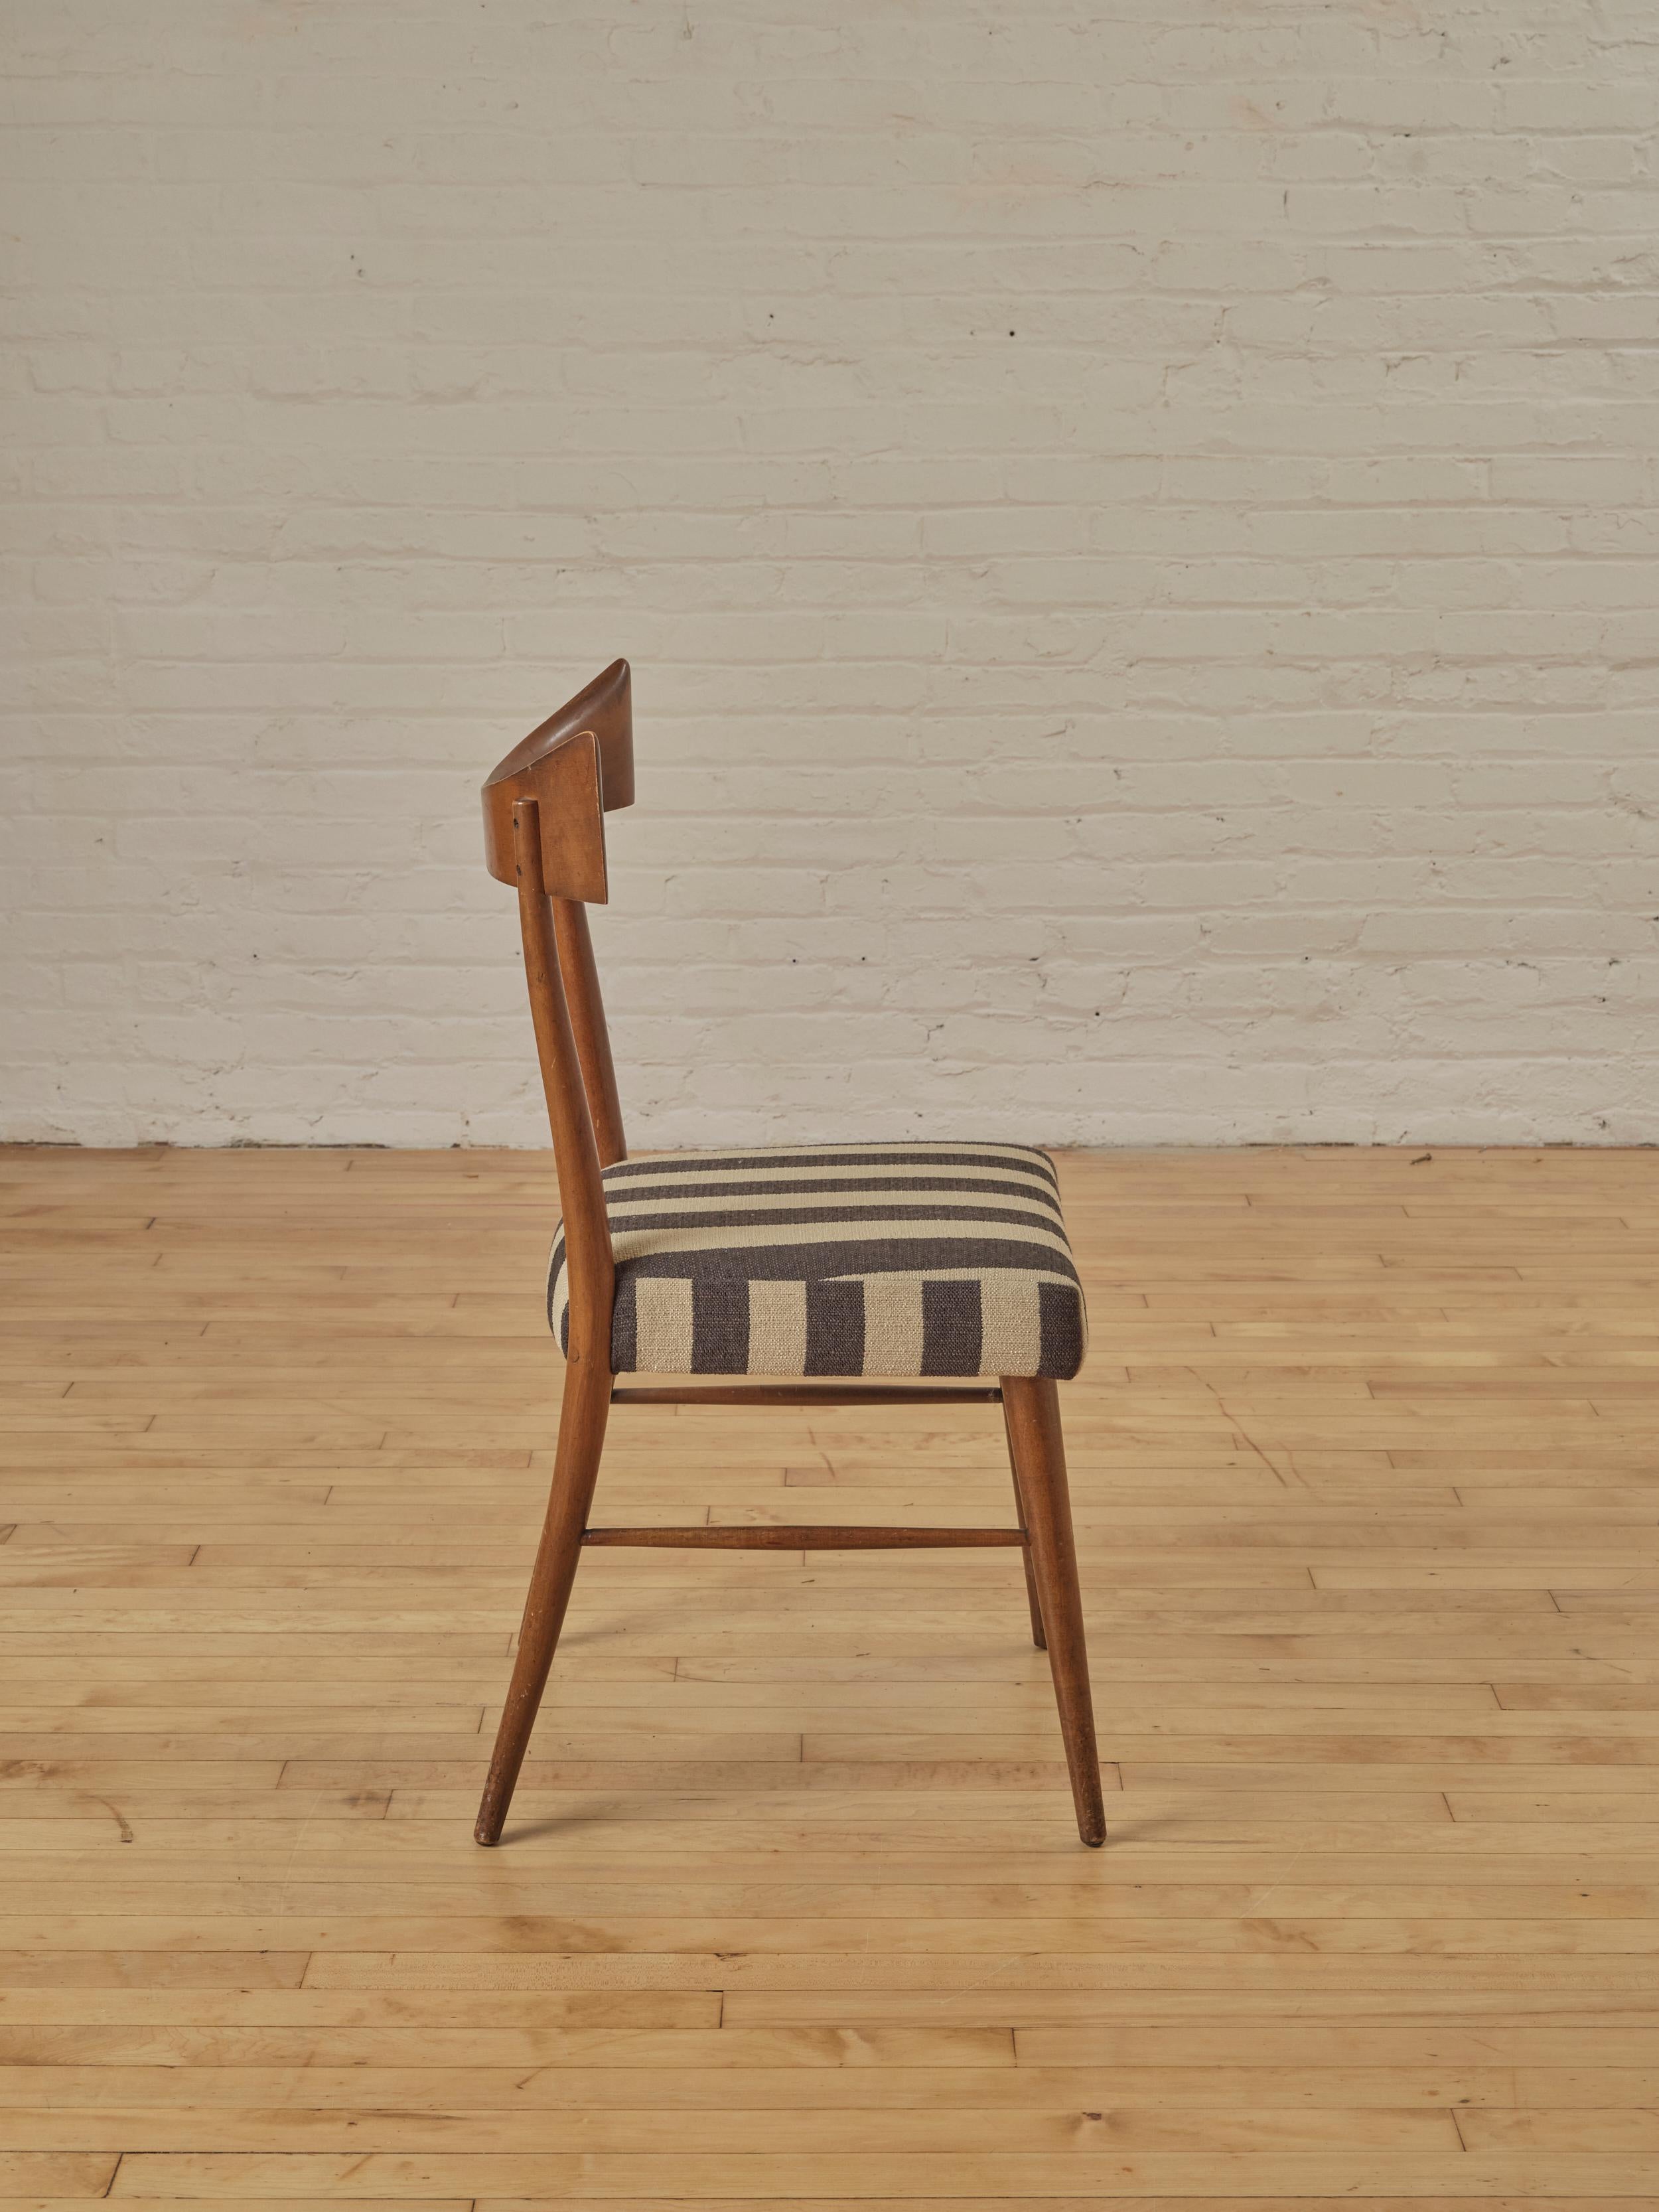 Bowtie Accent Chair by Paul McCobb for Winchendon, featuring a walnut frame and newly reupholstered in striped cotton fabric.

About Paul McCobb: 

Paul McCobb (1917-1969) was a prominent American designer and furniture architect known for his